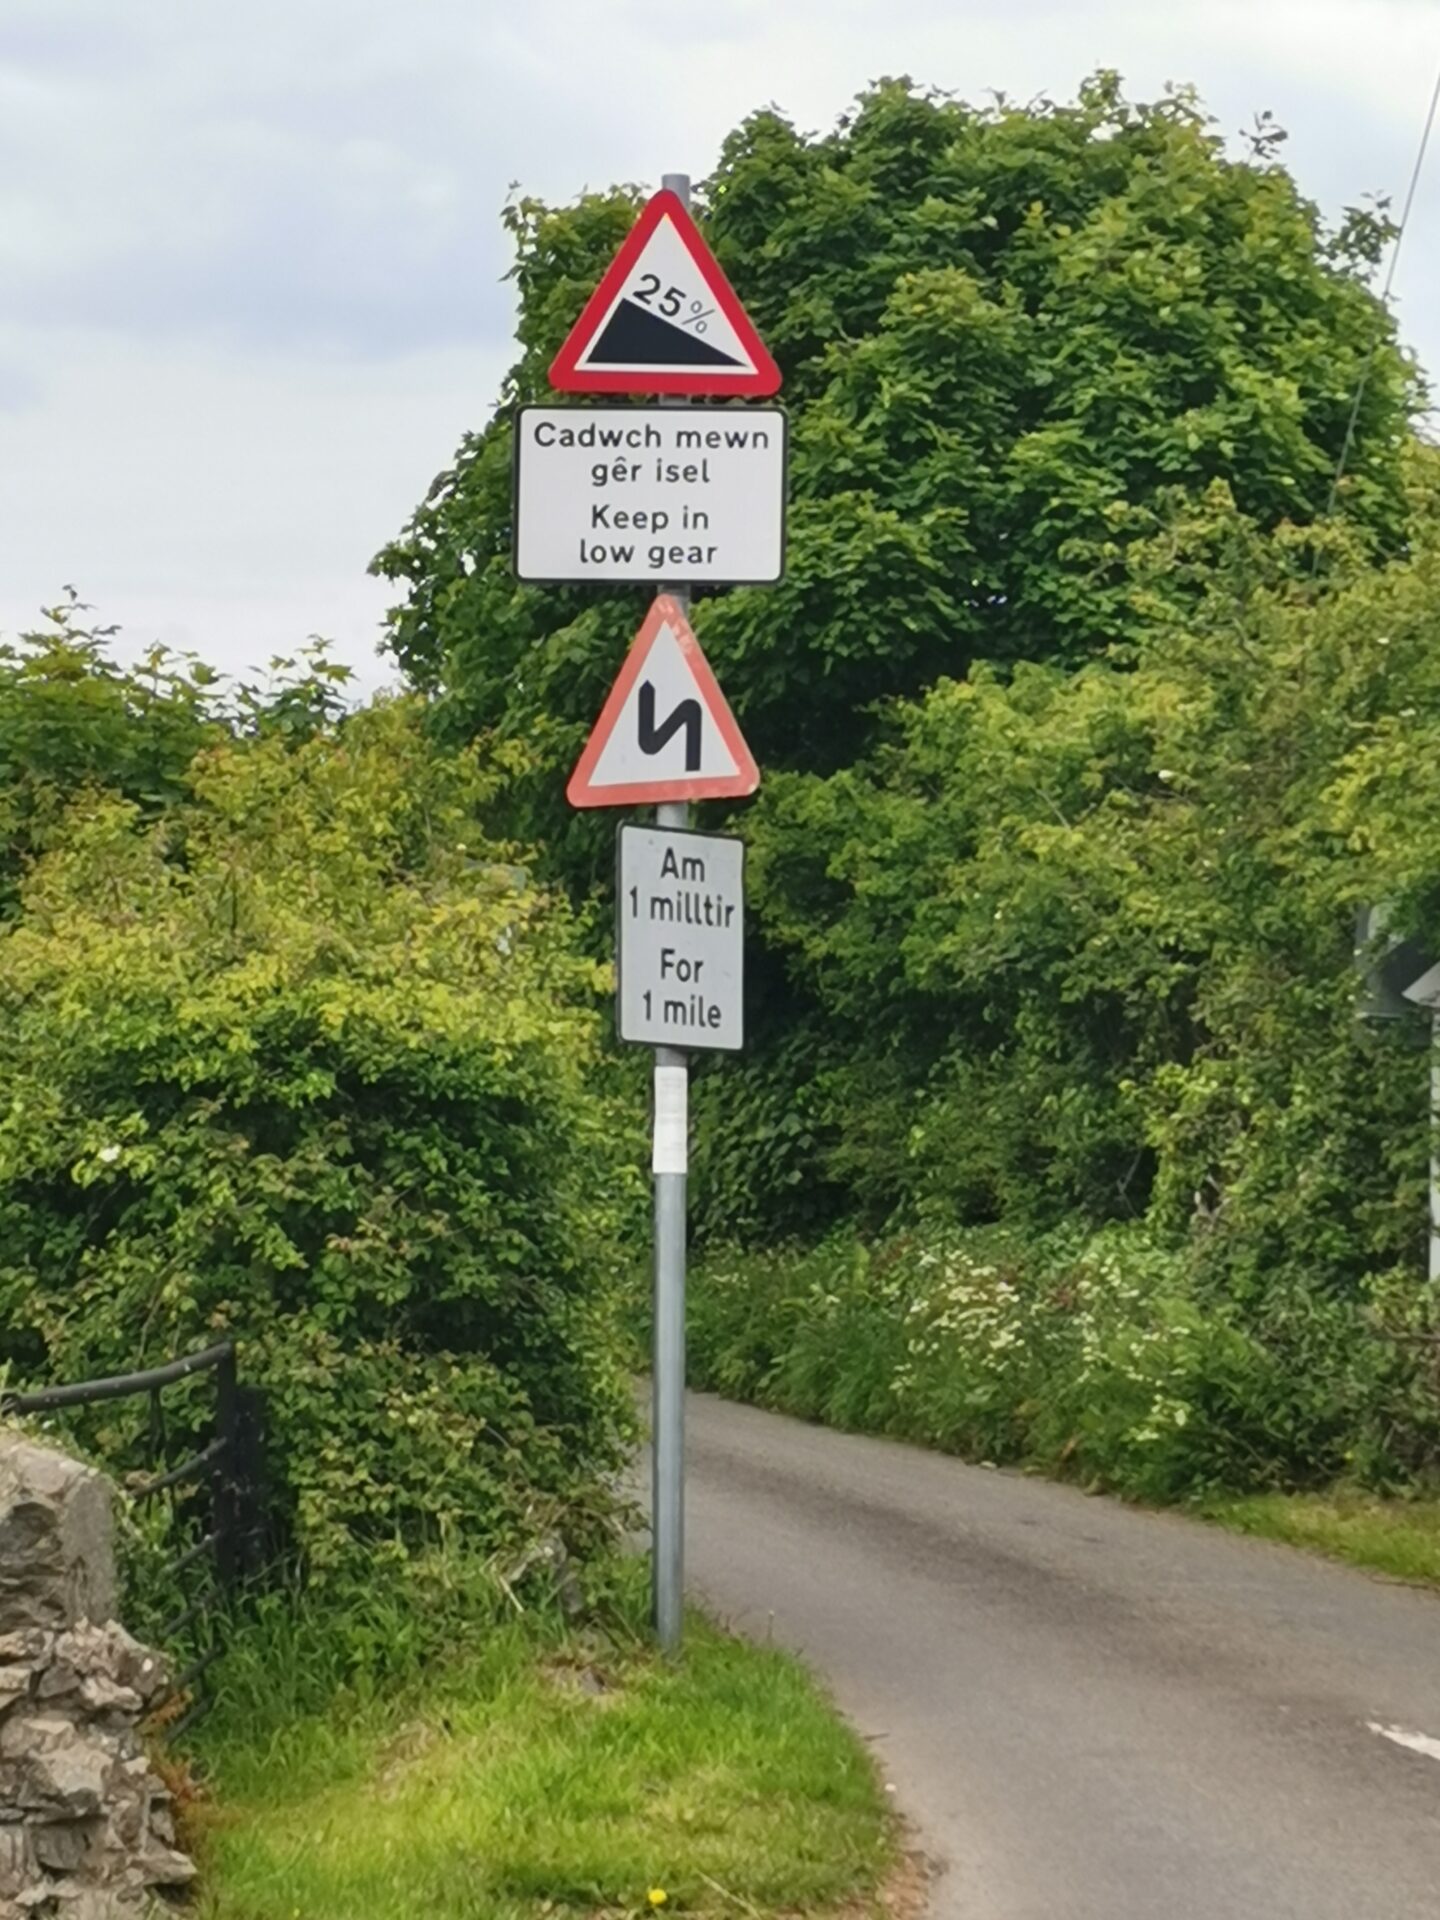 A road sign warning of bends and steep 25% hill